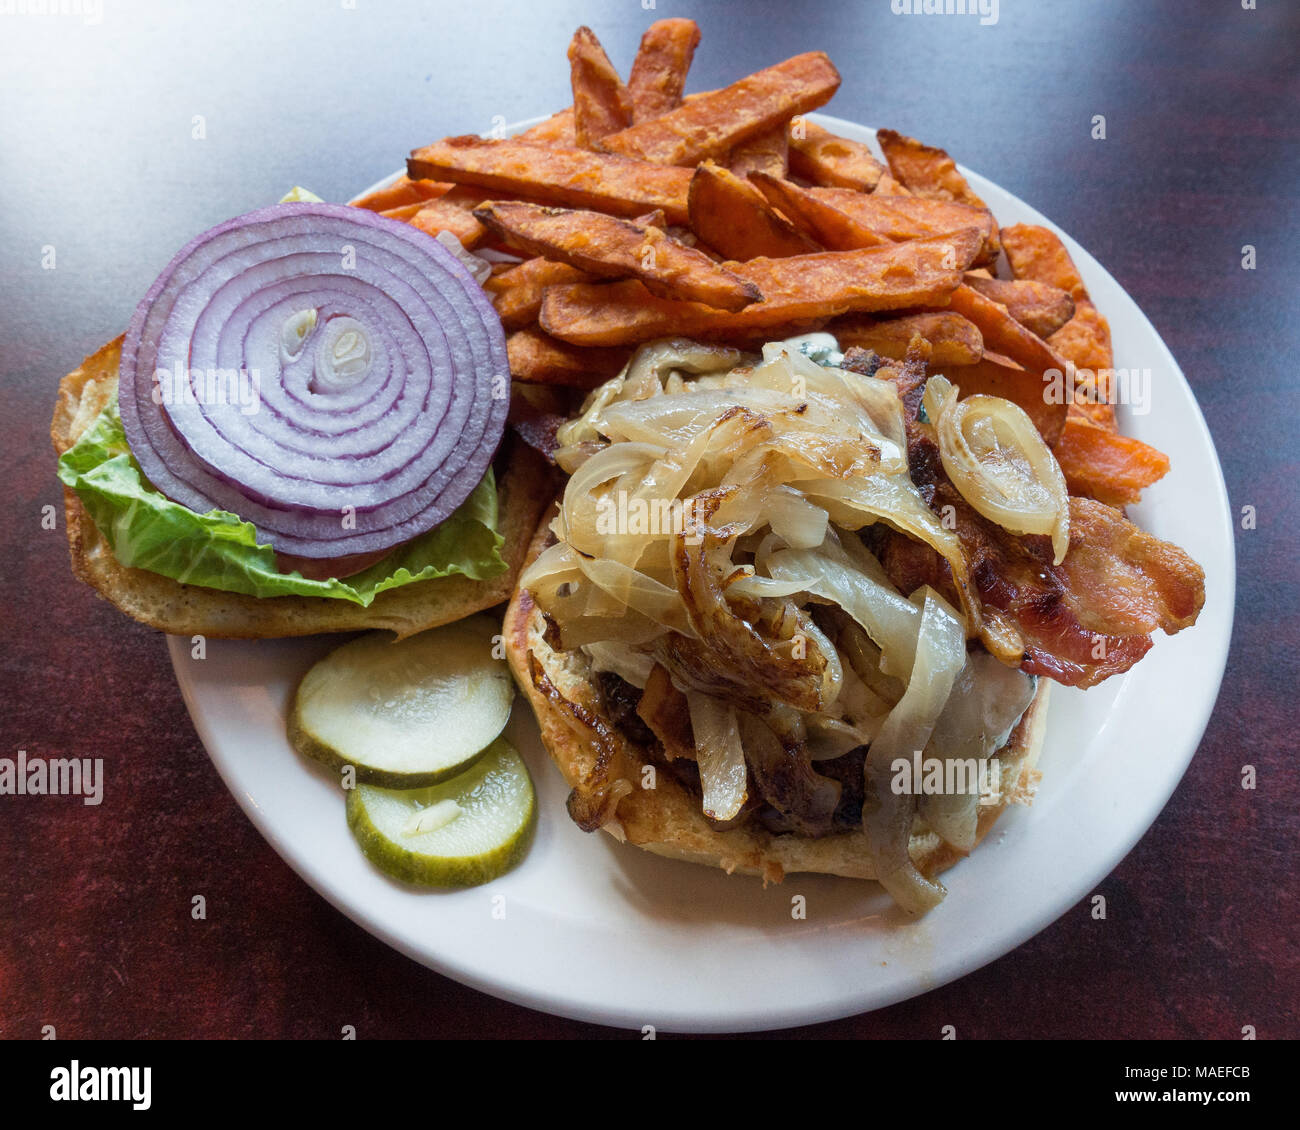 A gourmet cheeseburger with blue cheese, bacon and onions on a soft roll served with lettuce, onion and tomato, pickles and sweet potato fries. Stock Photo